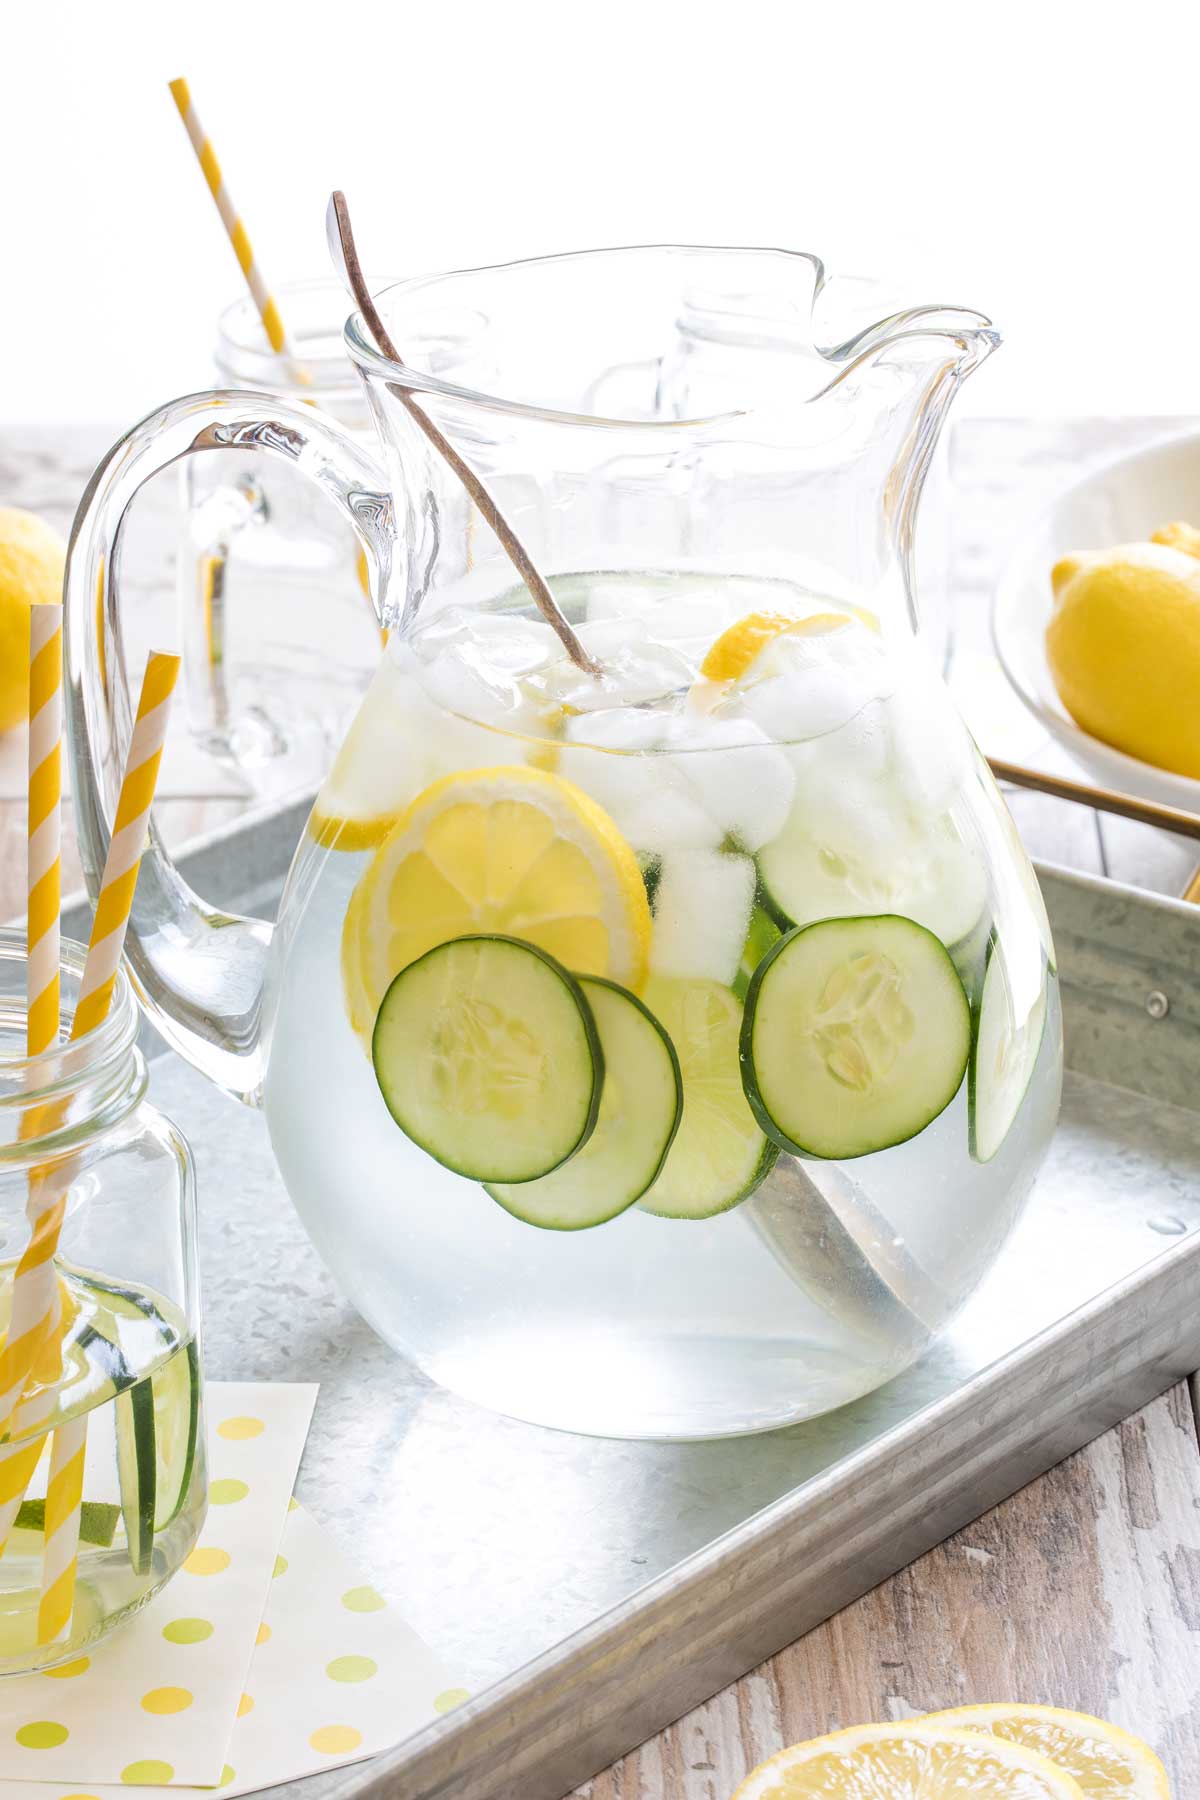 Glass pitcher full of Lemon Lime Cucumber Water and ice cubes, with large antique spoon in it, on metal tray with extra lemons, glasses and straws.